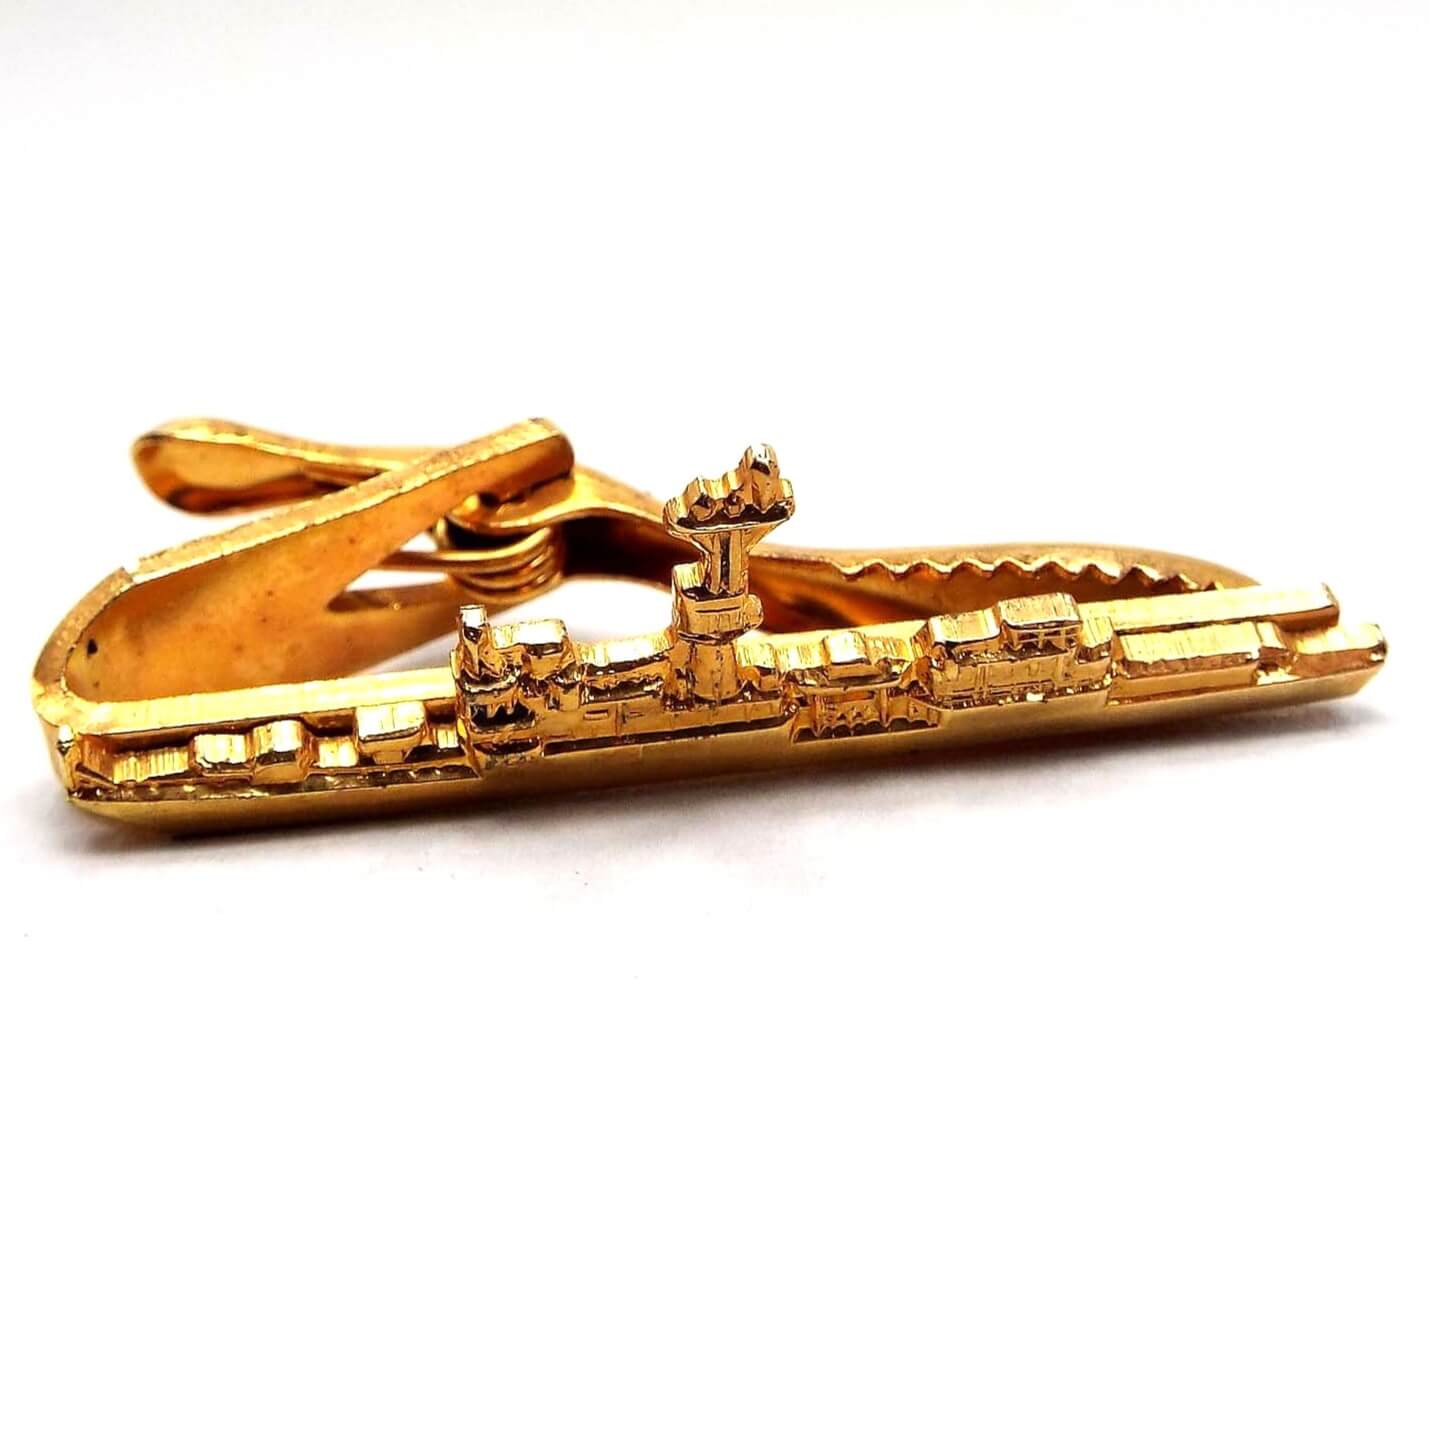 Front view of the retro vintage Hilborn Hamburger vintage tie clip. It is gold tone in color and is in the shape of a detailed Naval ship.